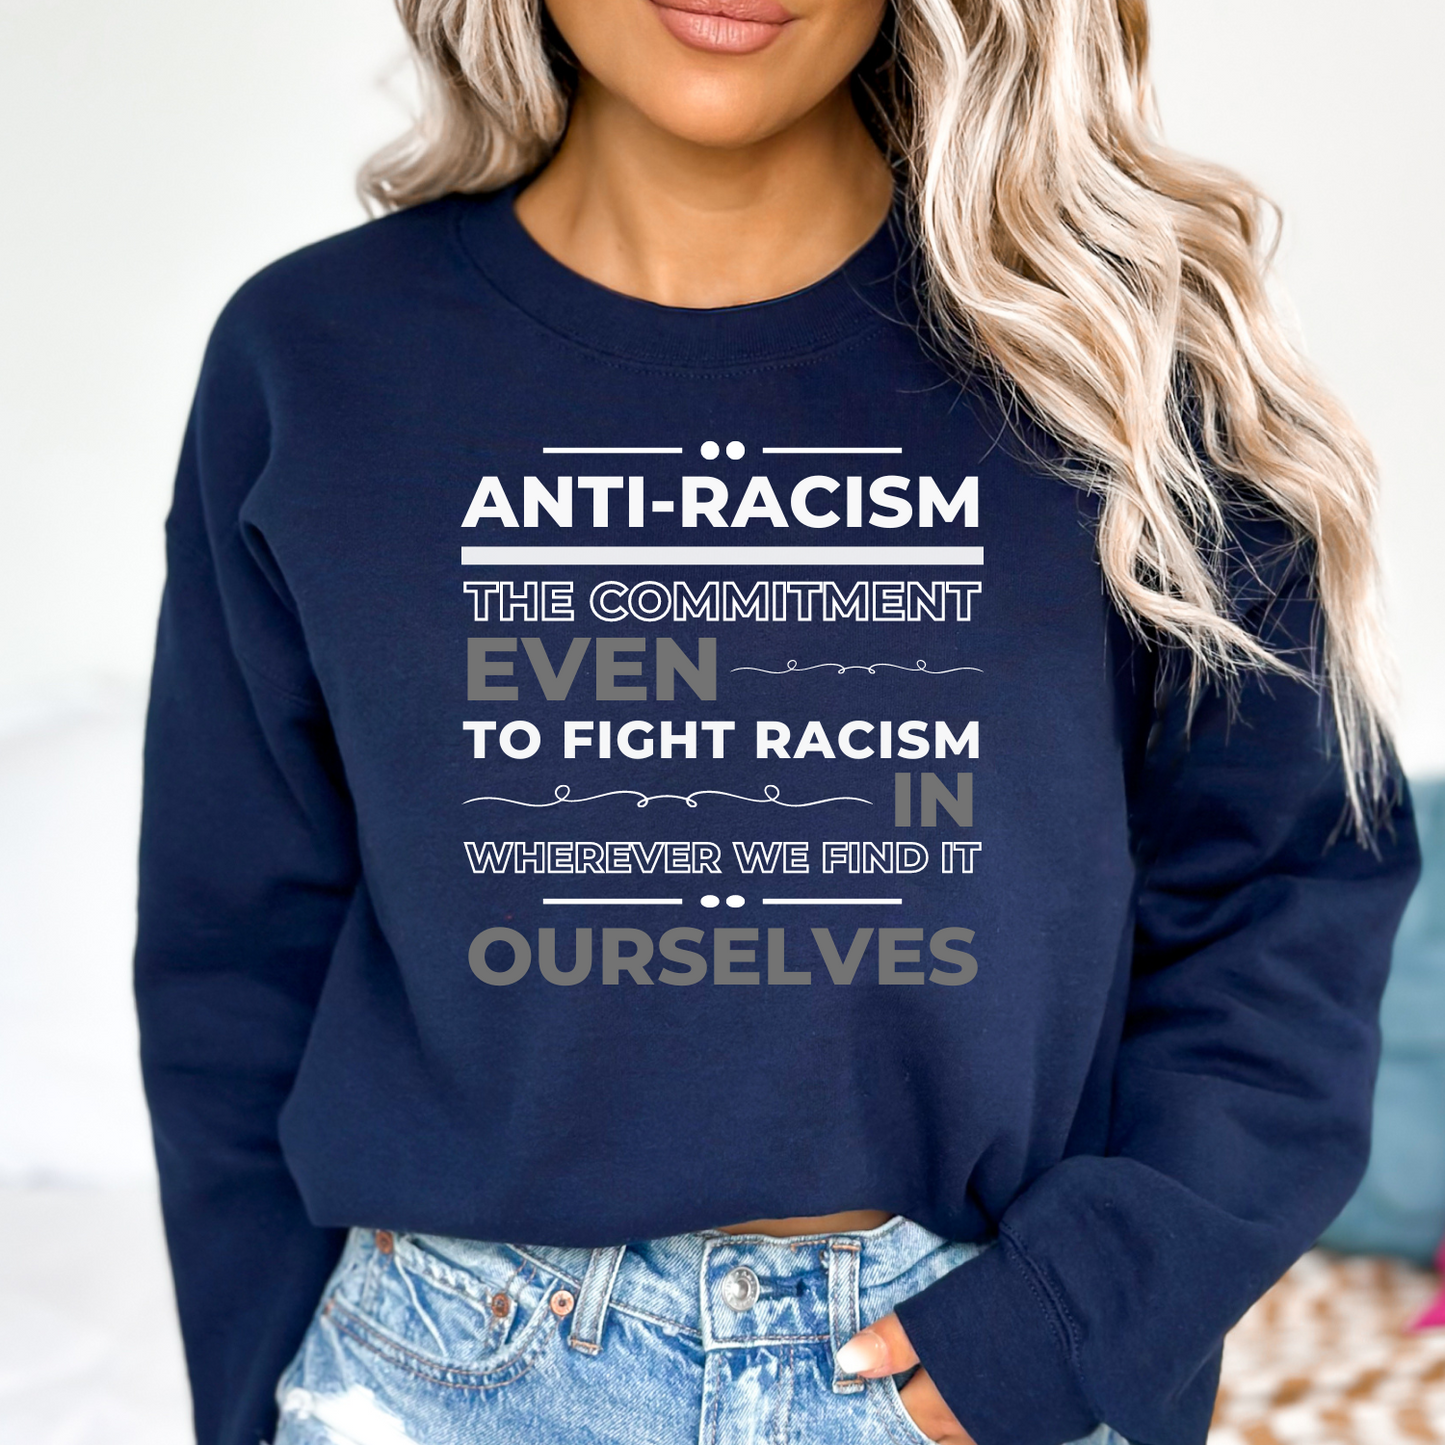 Navy women's sweatshirt with a strong anti-racism message. Use fashion to stand up for justice and equality. 